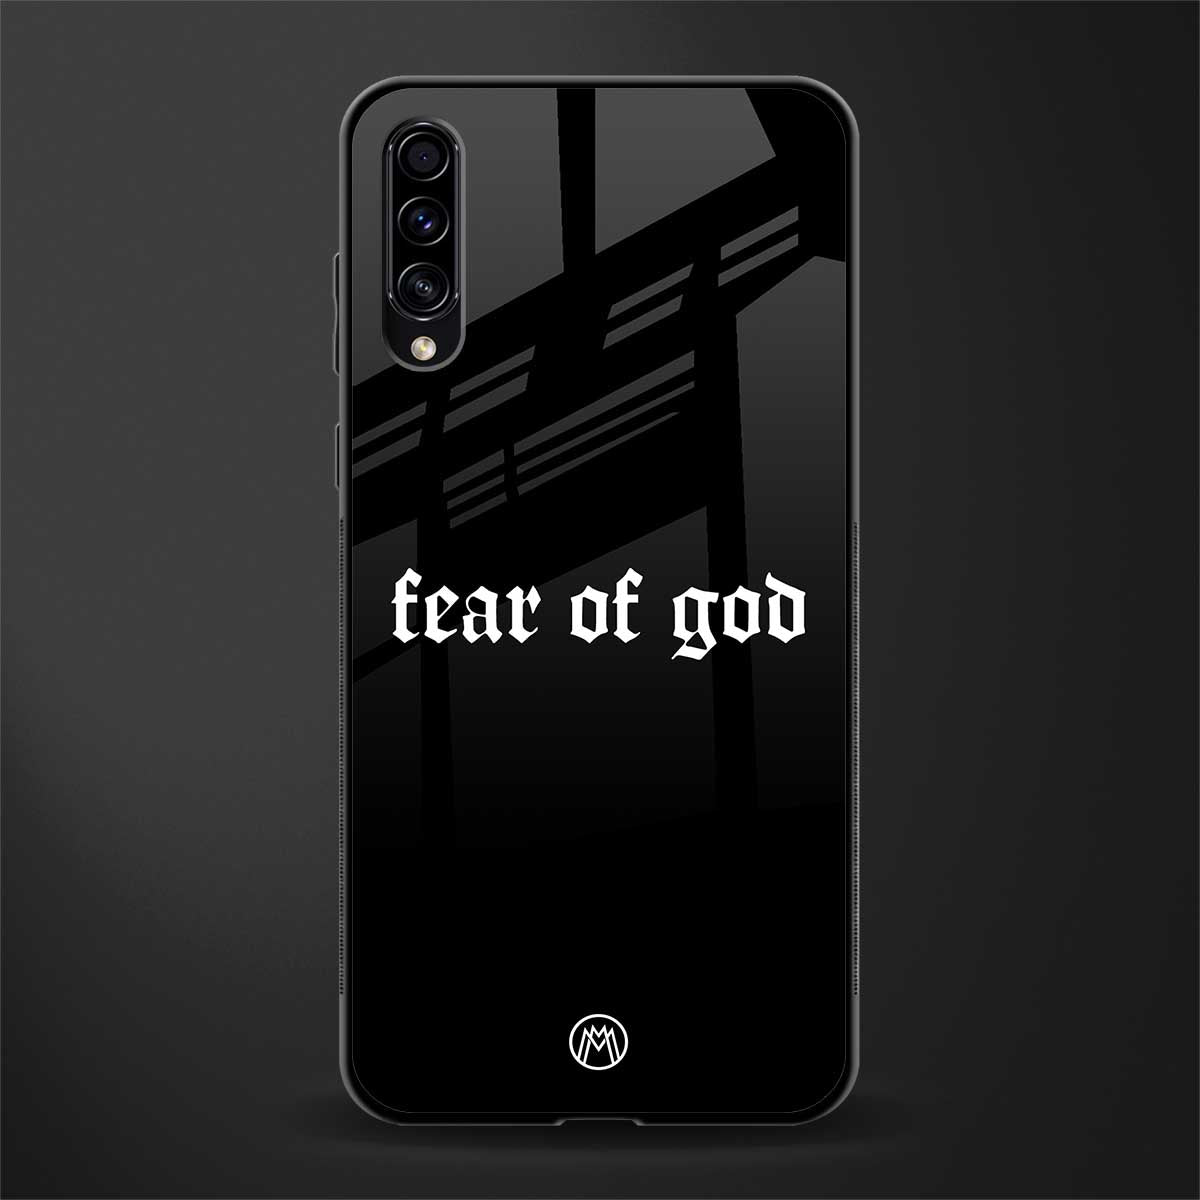 fear of god phone cover for samsung galaxy a70